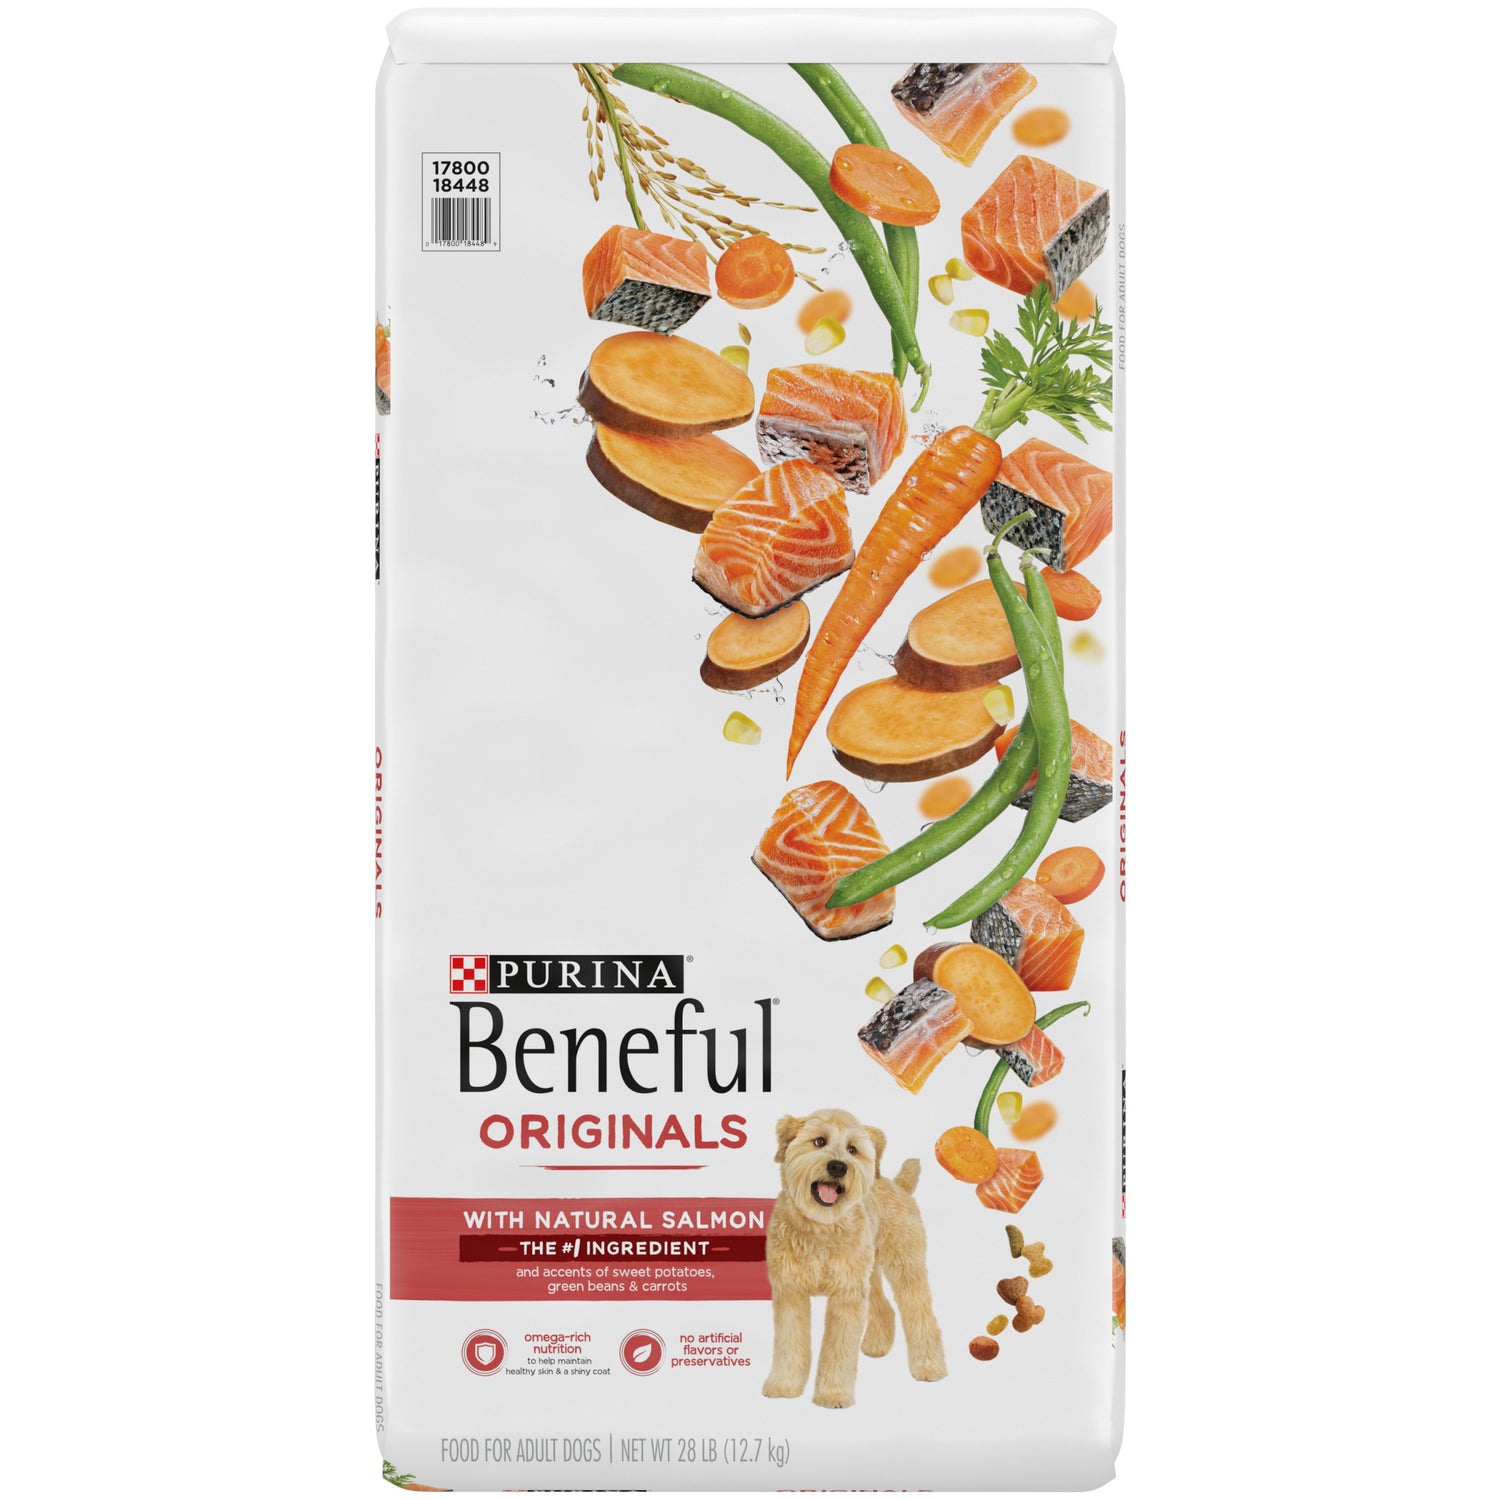 Purina Beneful Originals with Natural Salmon, Skin and Coat Support Dry Dog Food, 28 Lb. Bag